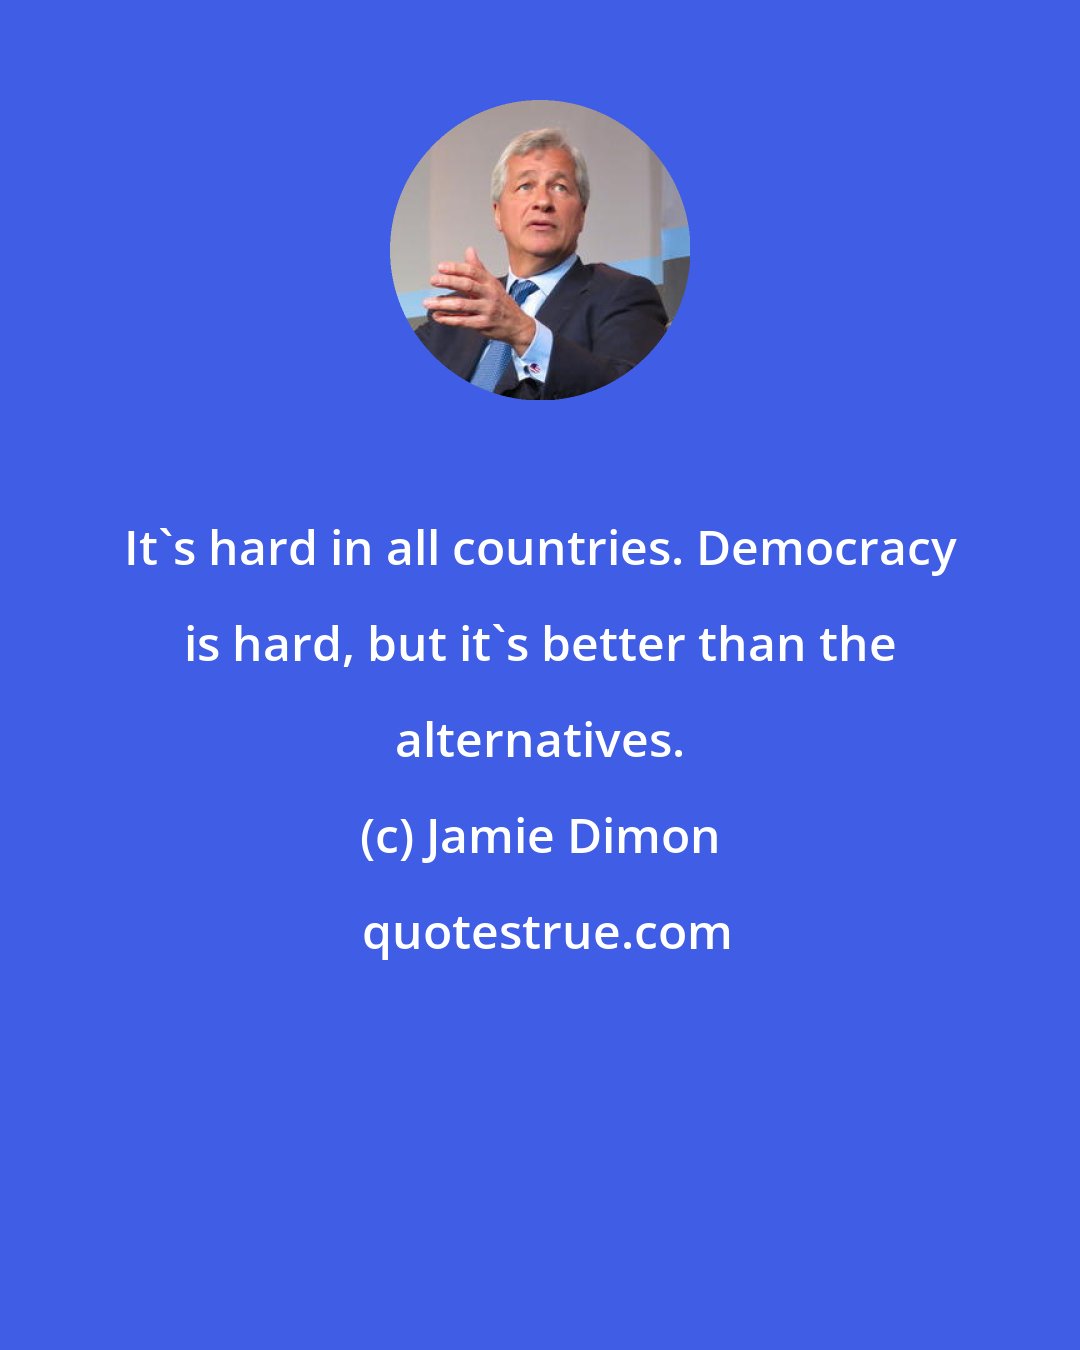 Jamie Dimon: It's hard in all countries. Democracy is hard, but it's better than the alternatives.